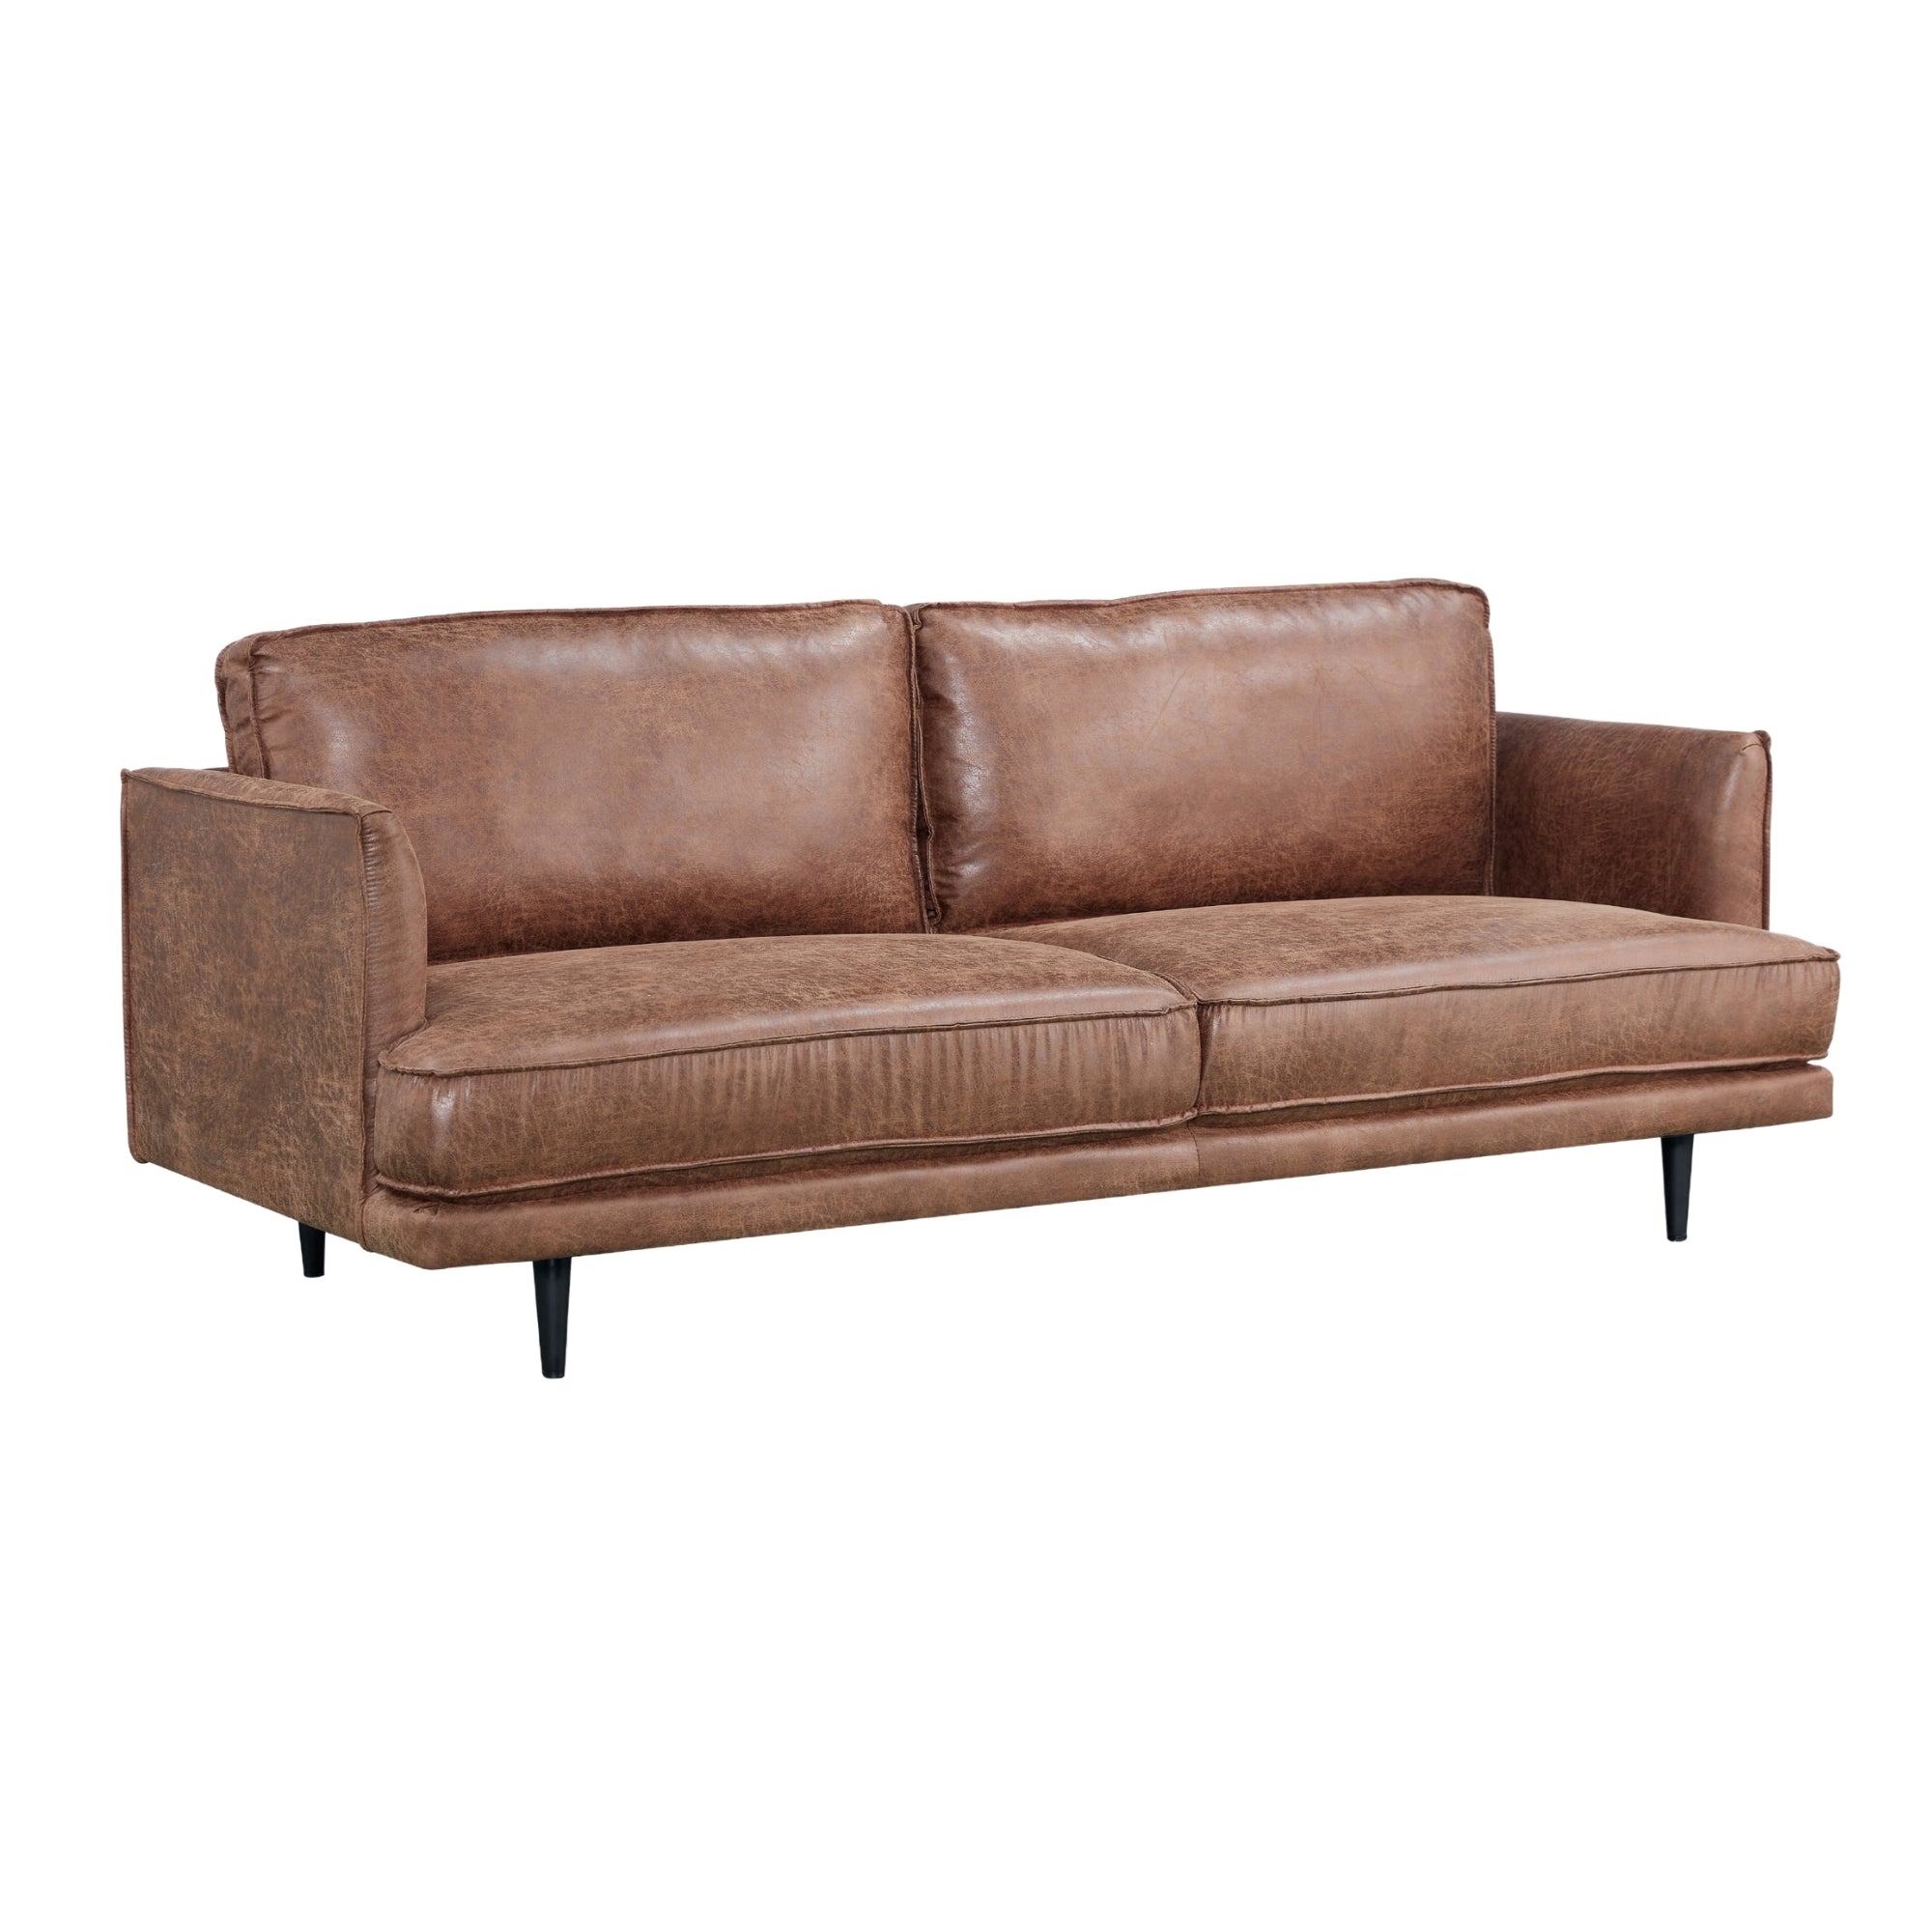 Durable Galvanized Steel Frame 3+2 Seater Sofa Set Upholstered in Stain Resistant Highland Fabric - Rosie